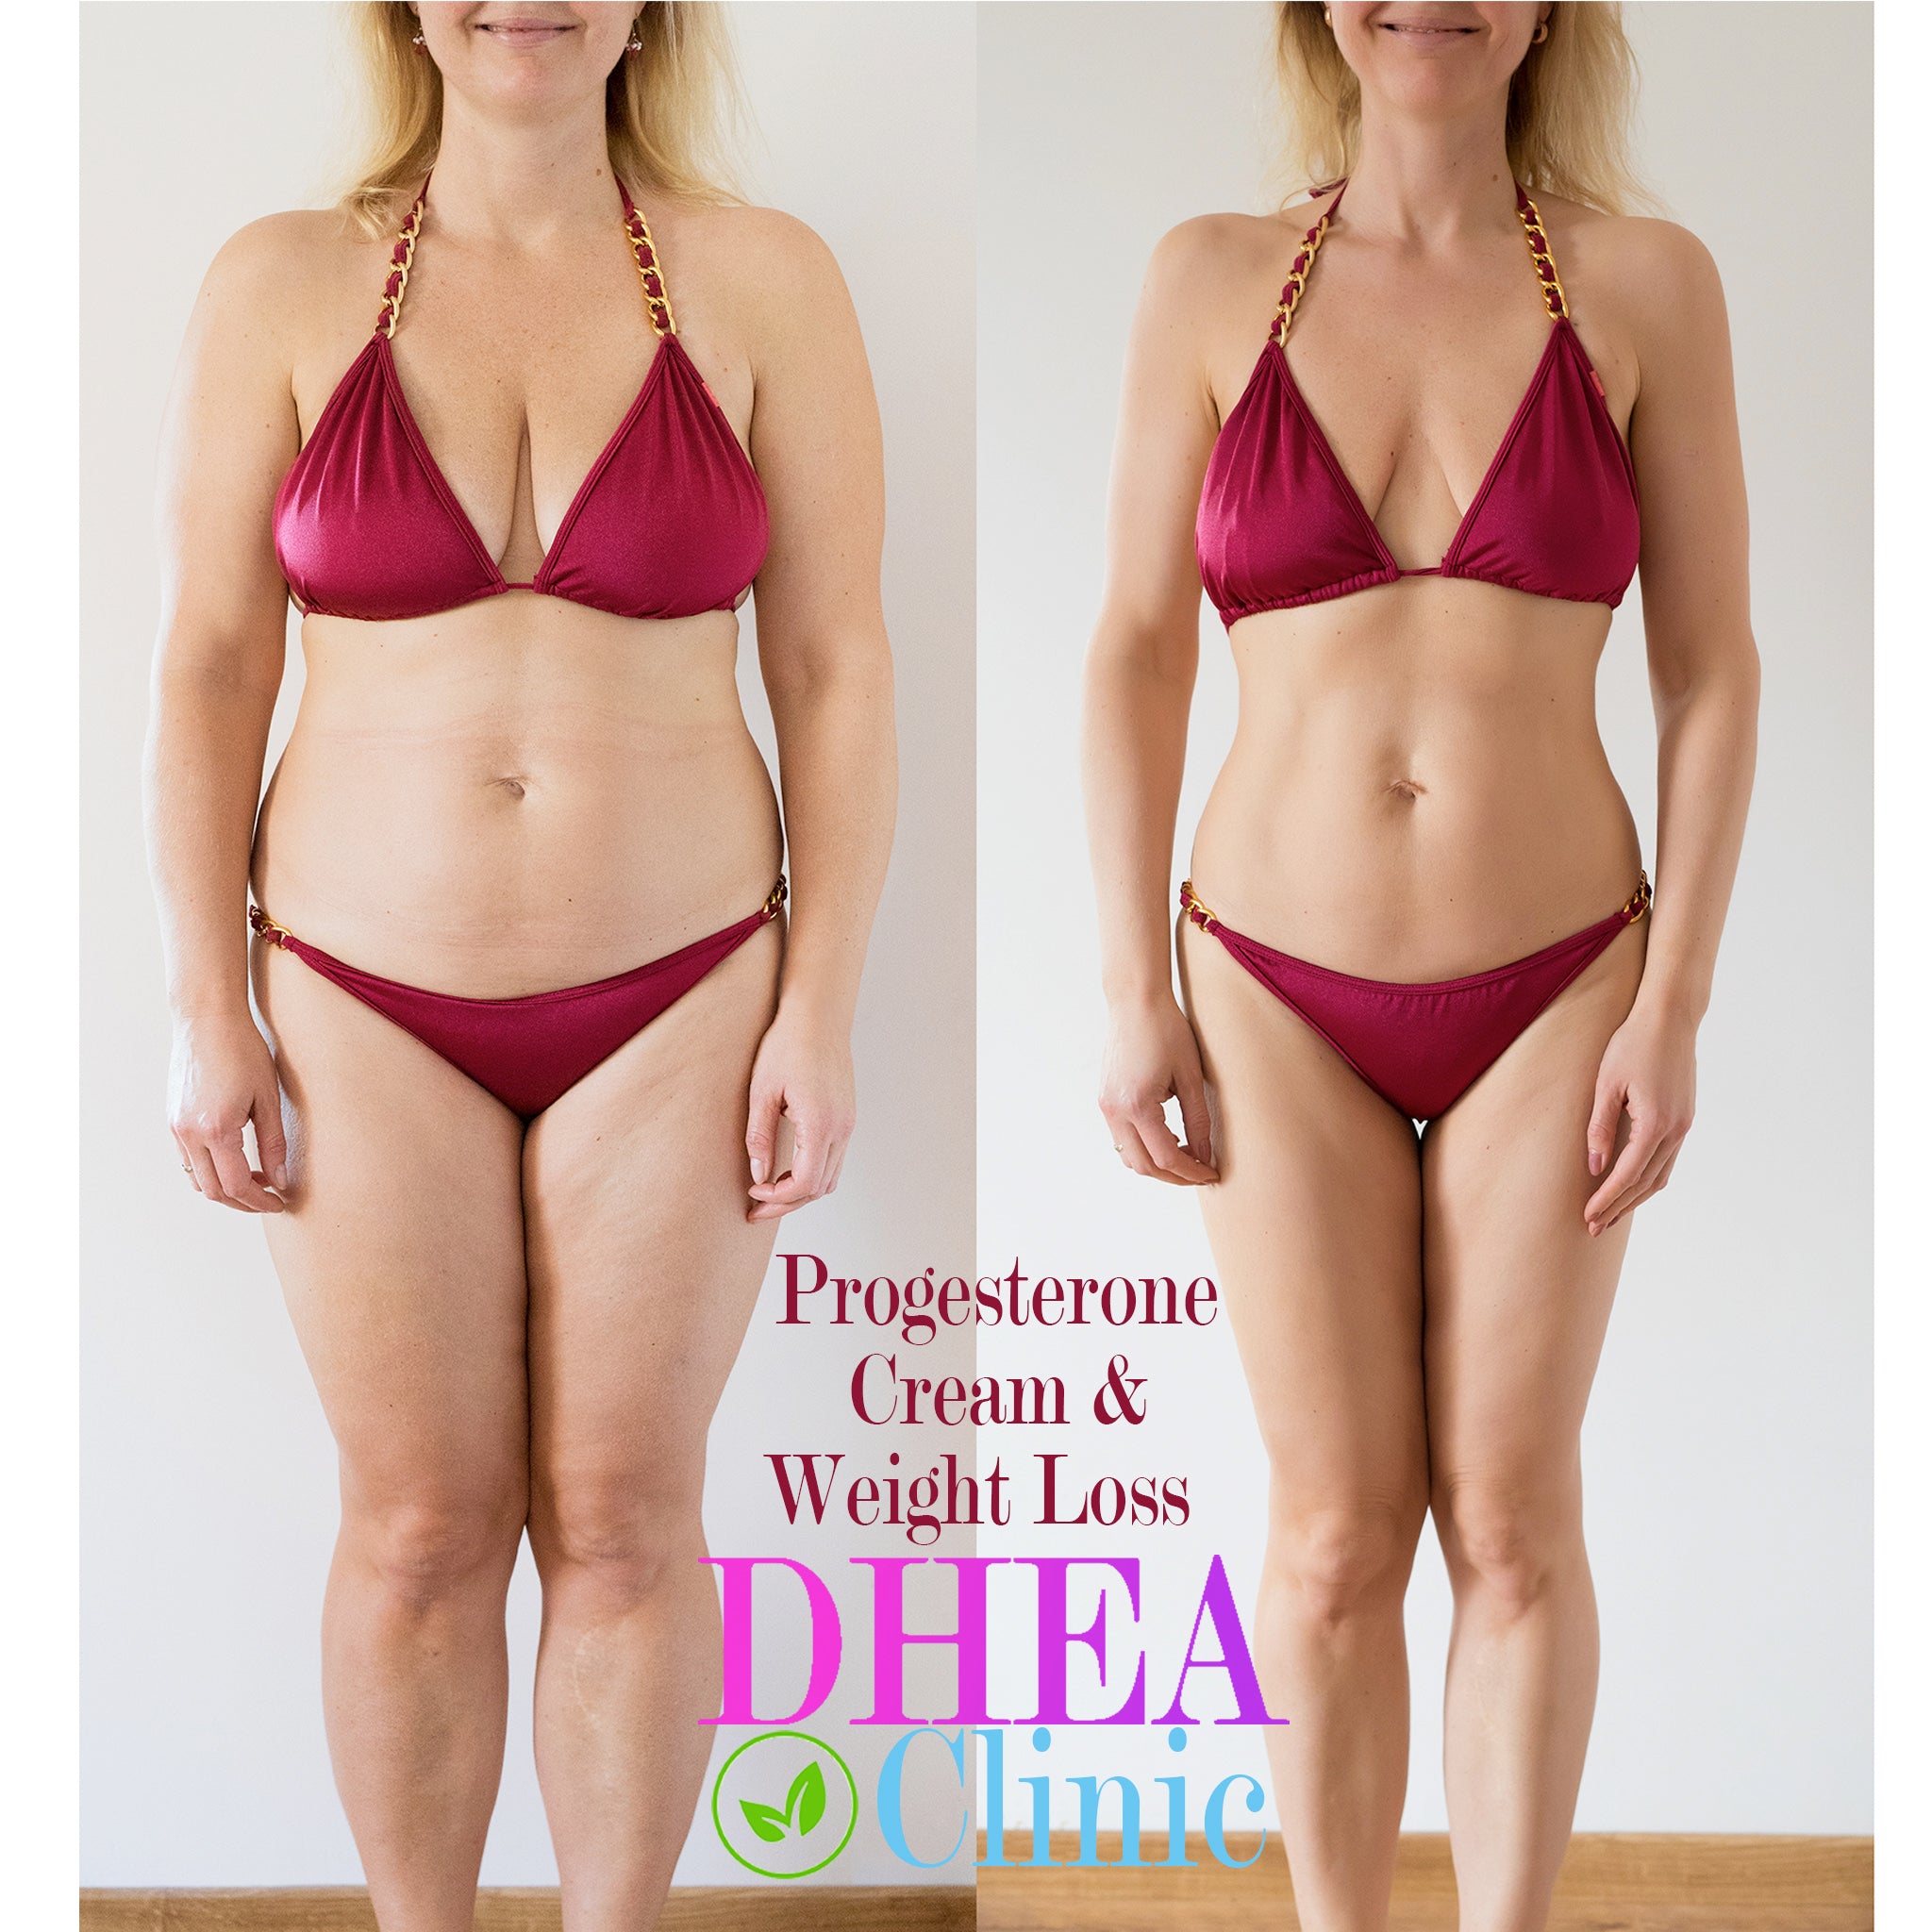 Progesterone Cream For Weight Loss Does It Work Dhea For Men And Women